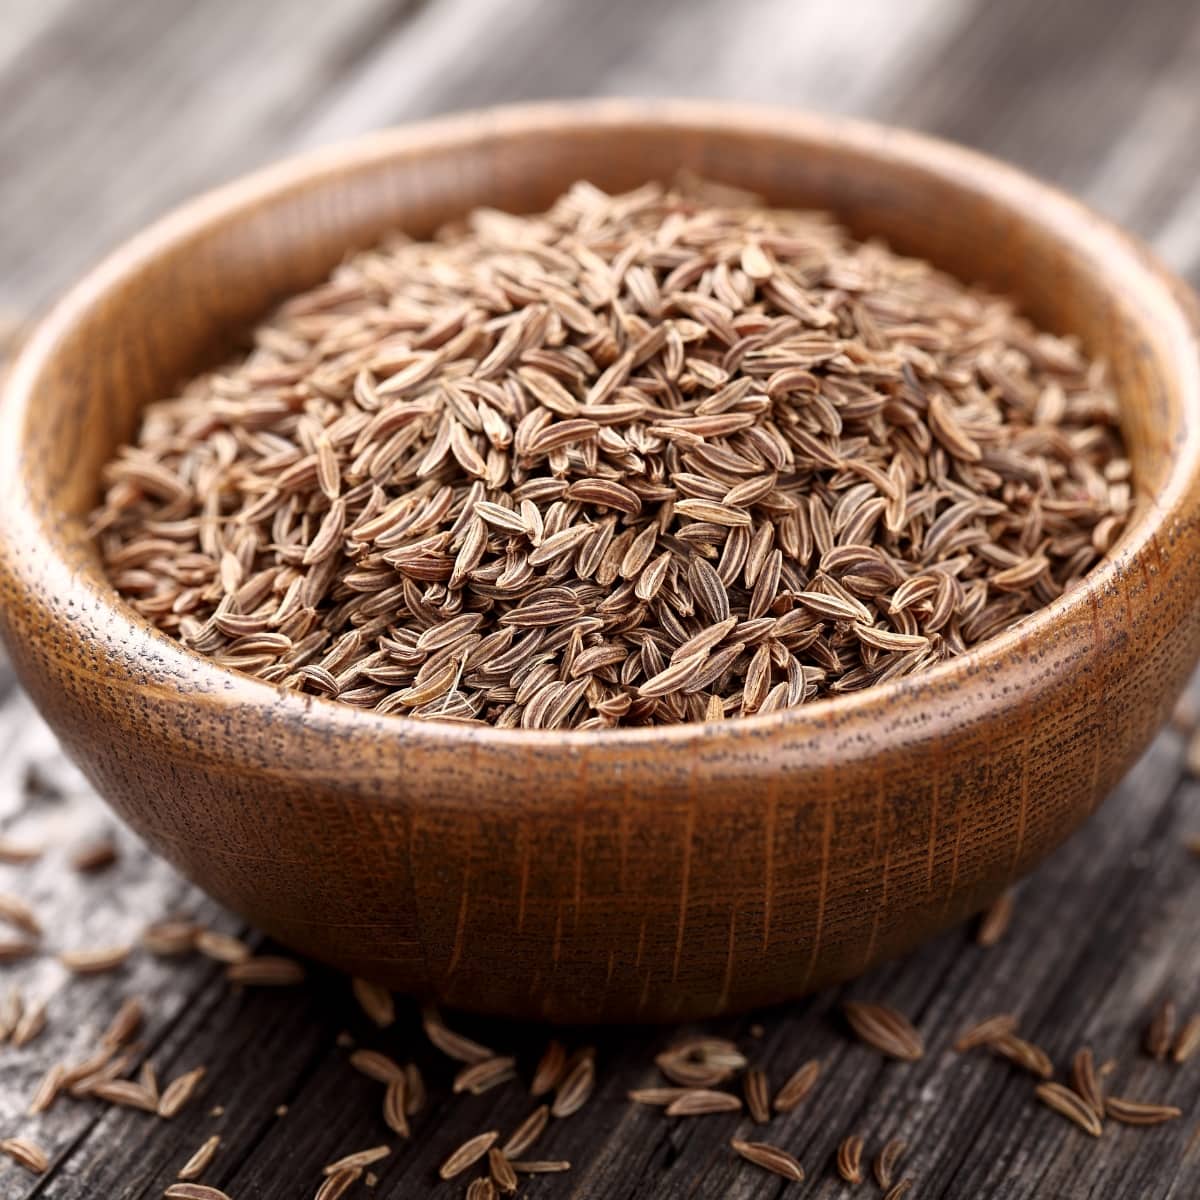 Cumin Seeds in a Wooden Bowl